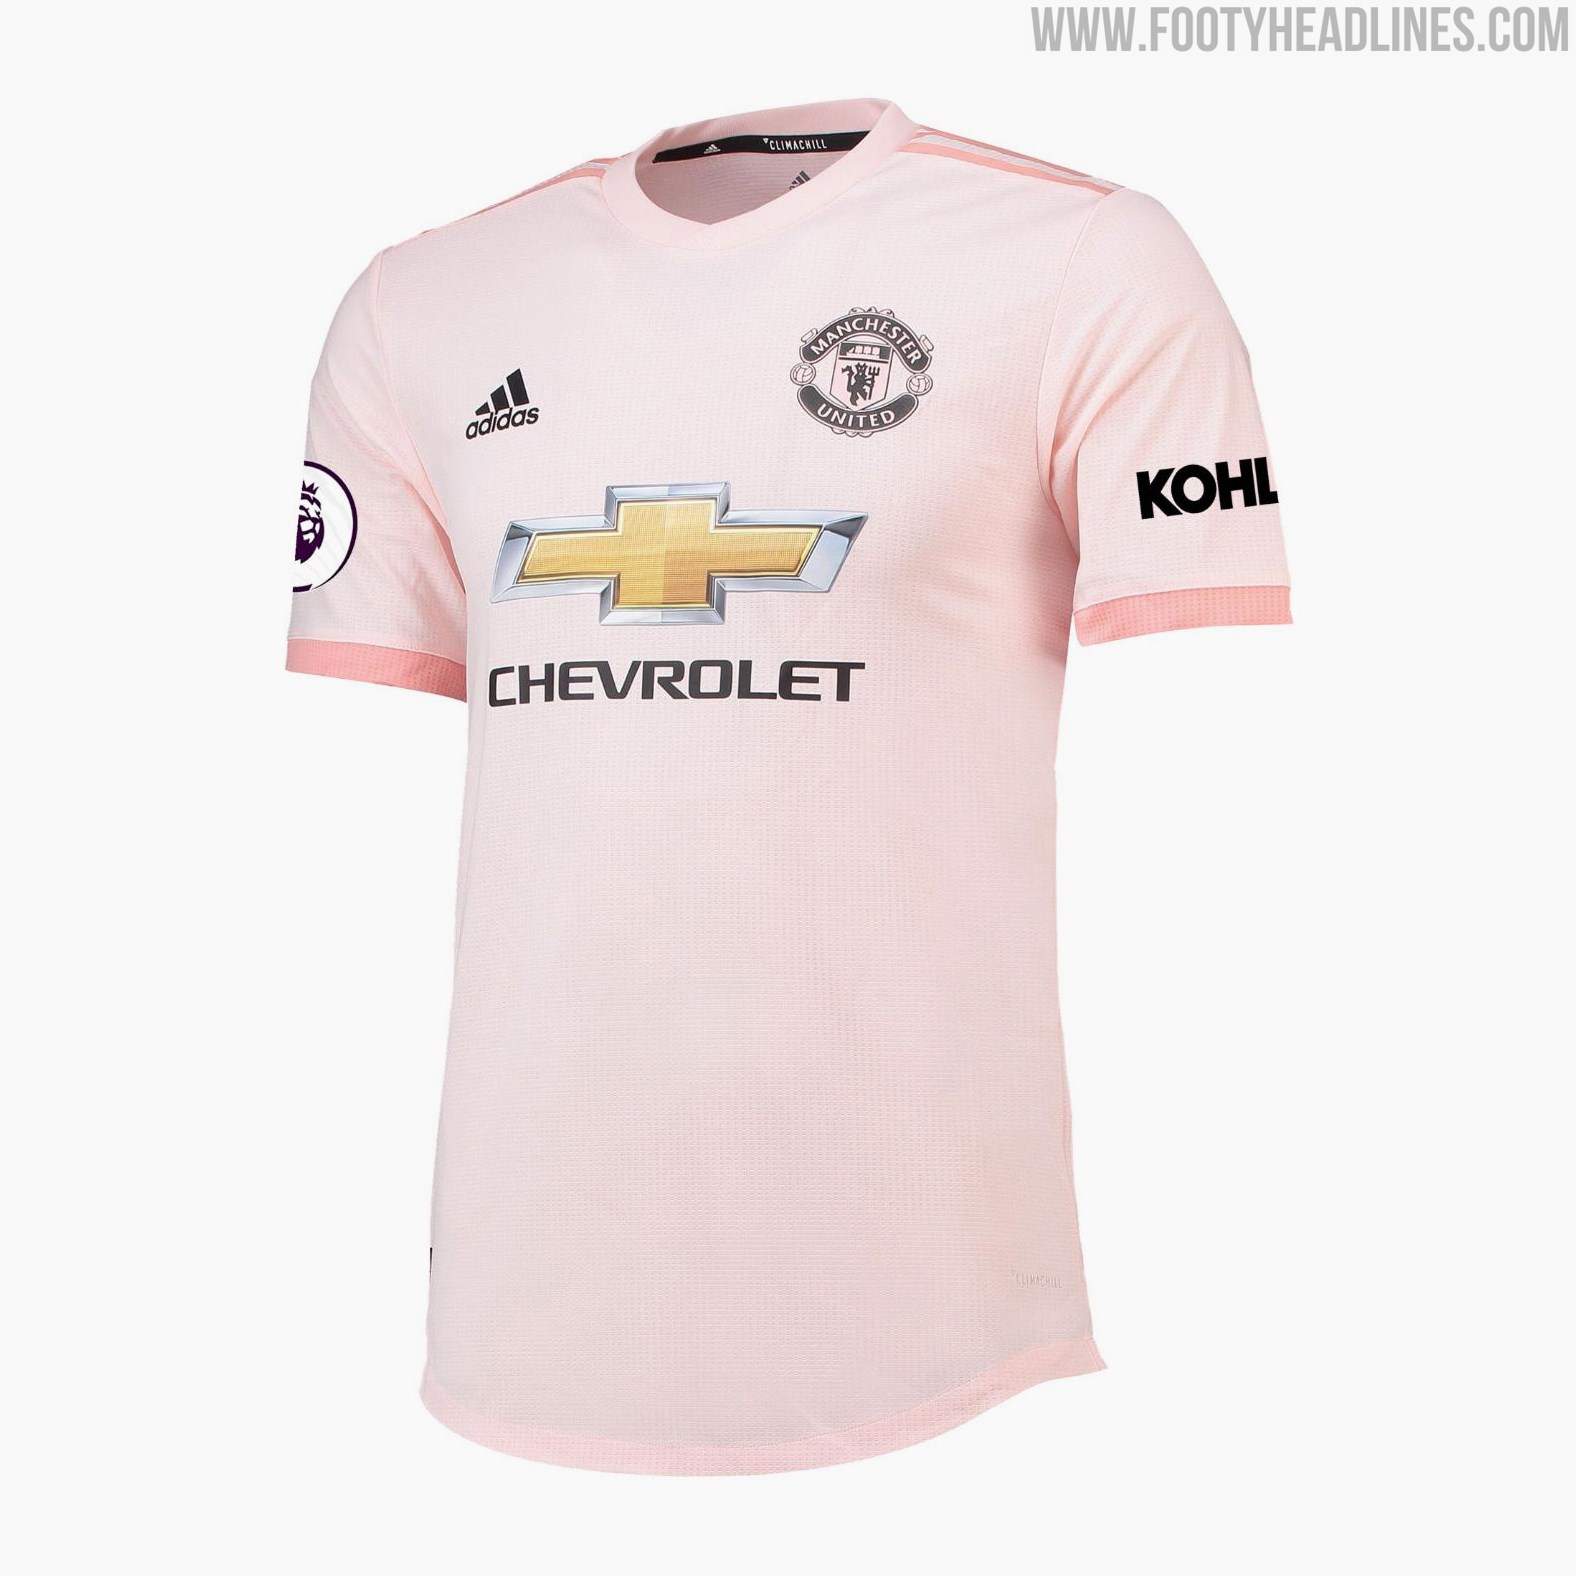 Manchester United 22-23 Away Kit Leaked - Footy Headlines